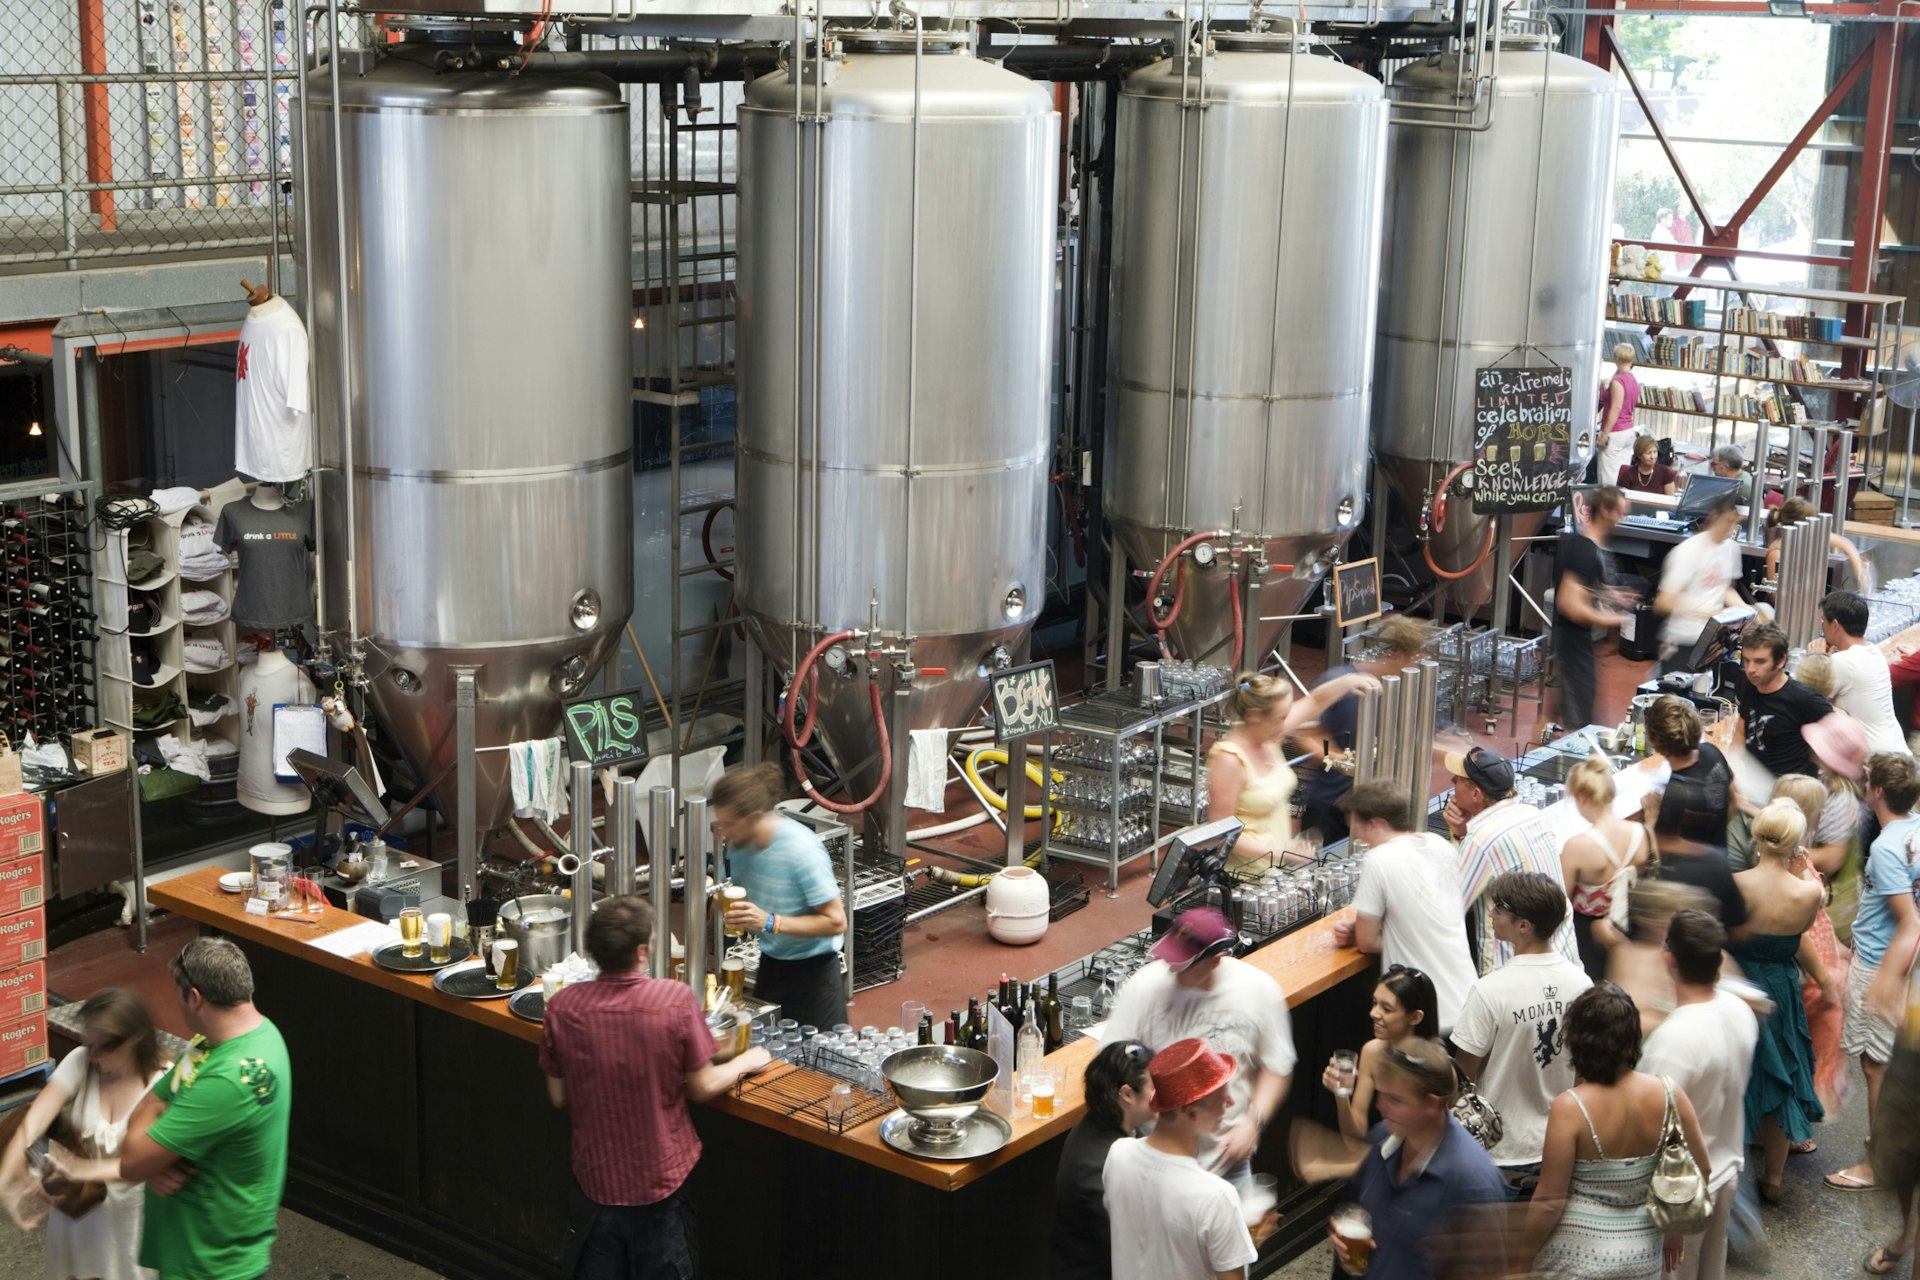 The beer flows at Fremantle's most famous brewery, Little Creatures. Image by Orien Harvey / Getty 